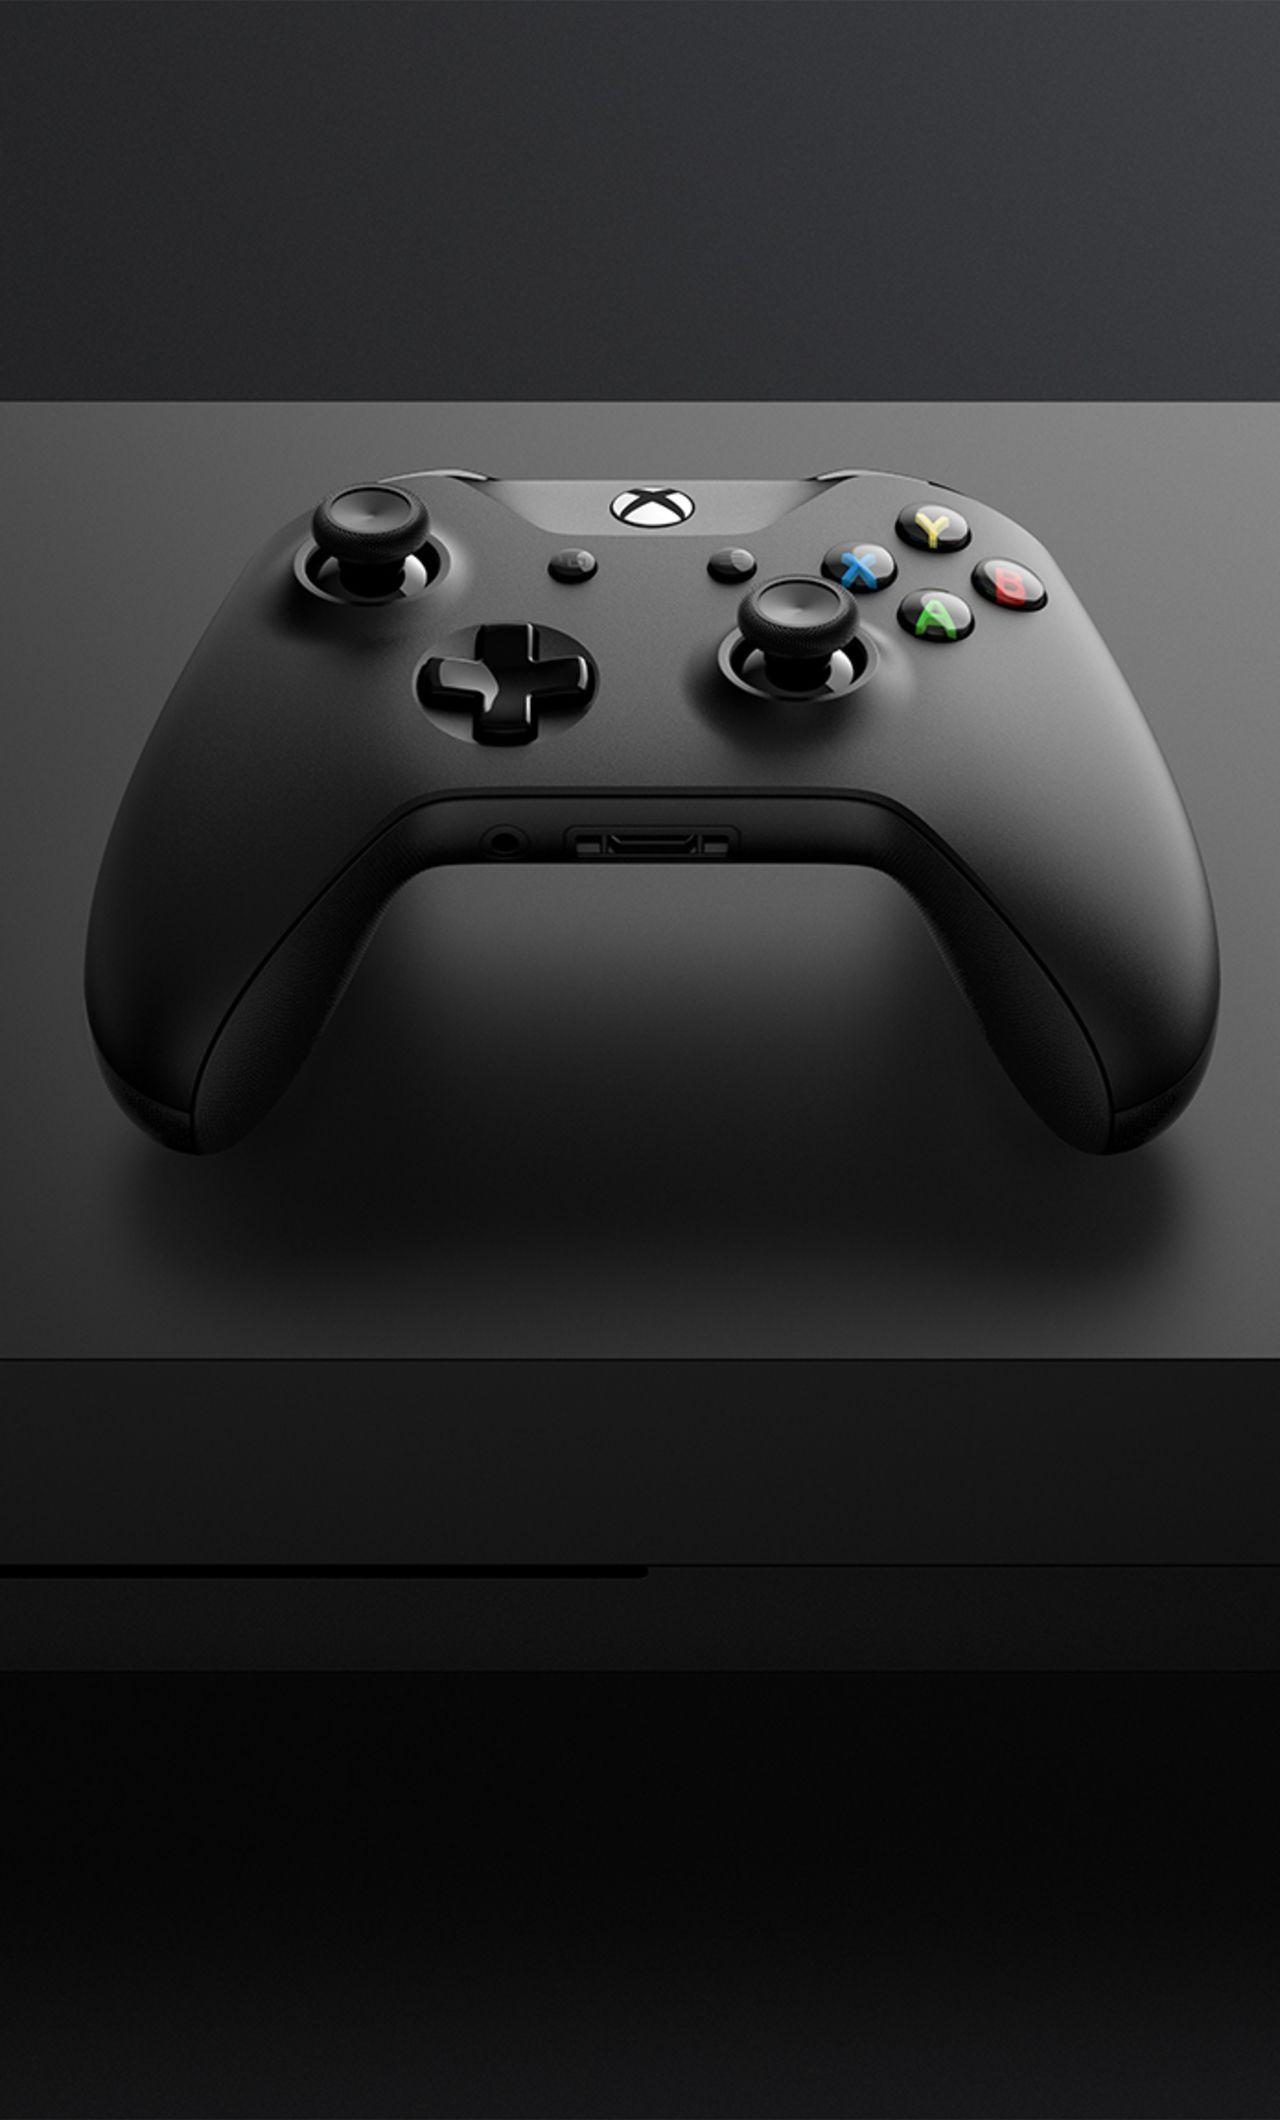 Xbox Iphone Wallpapers Top Free Xbox Iphone Backgrounds